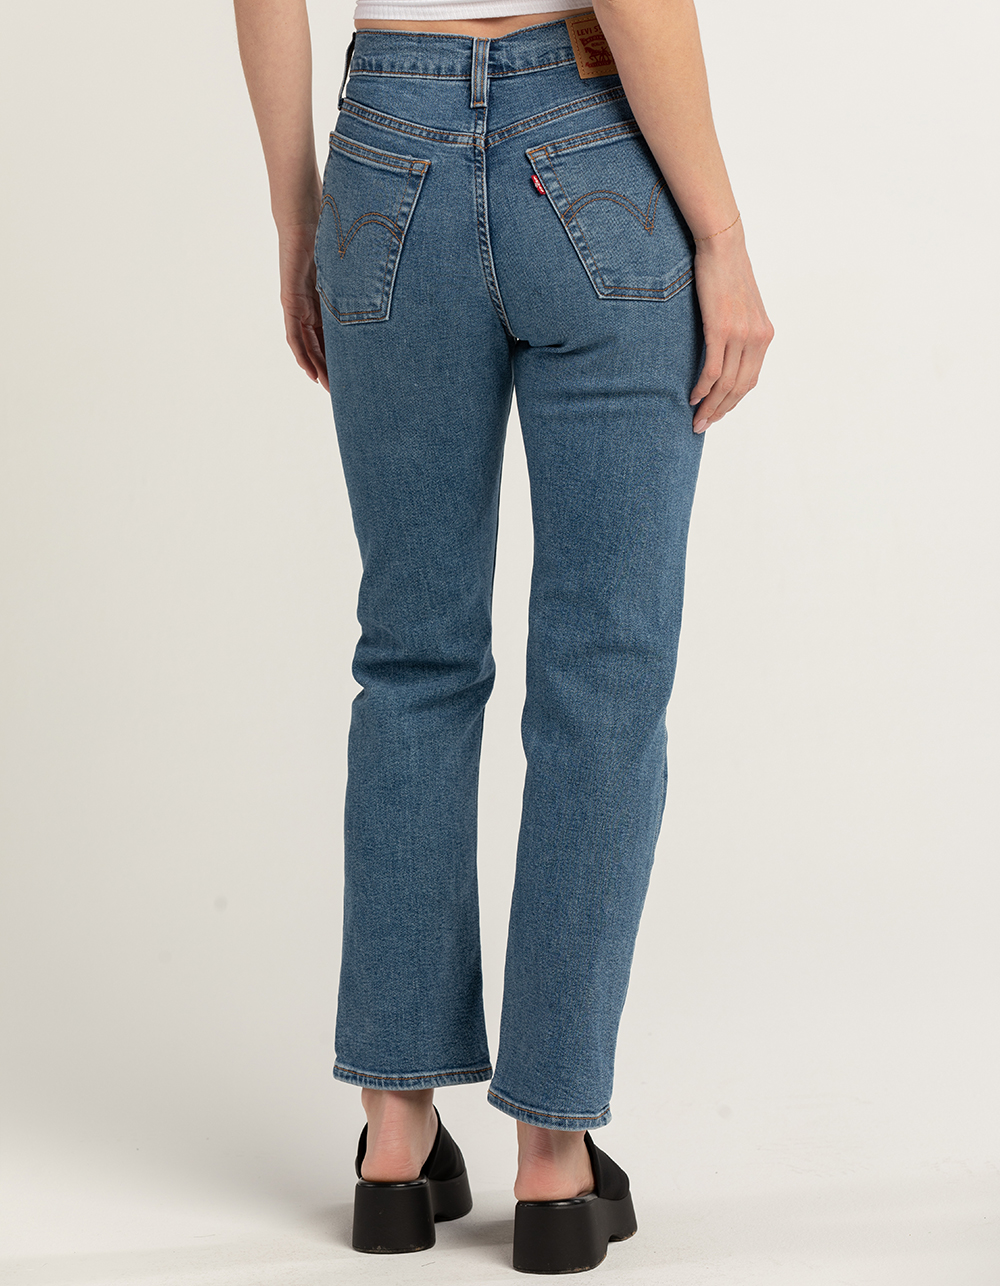 Levi's Wedgie fit: a review (and a love affair)  Levi jeans women,  Straight jeans outfit, Levis wedgie jeans